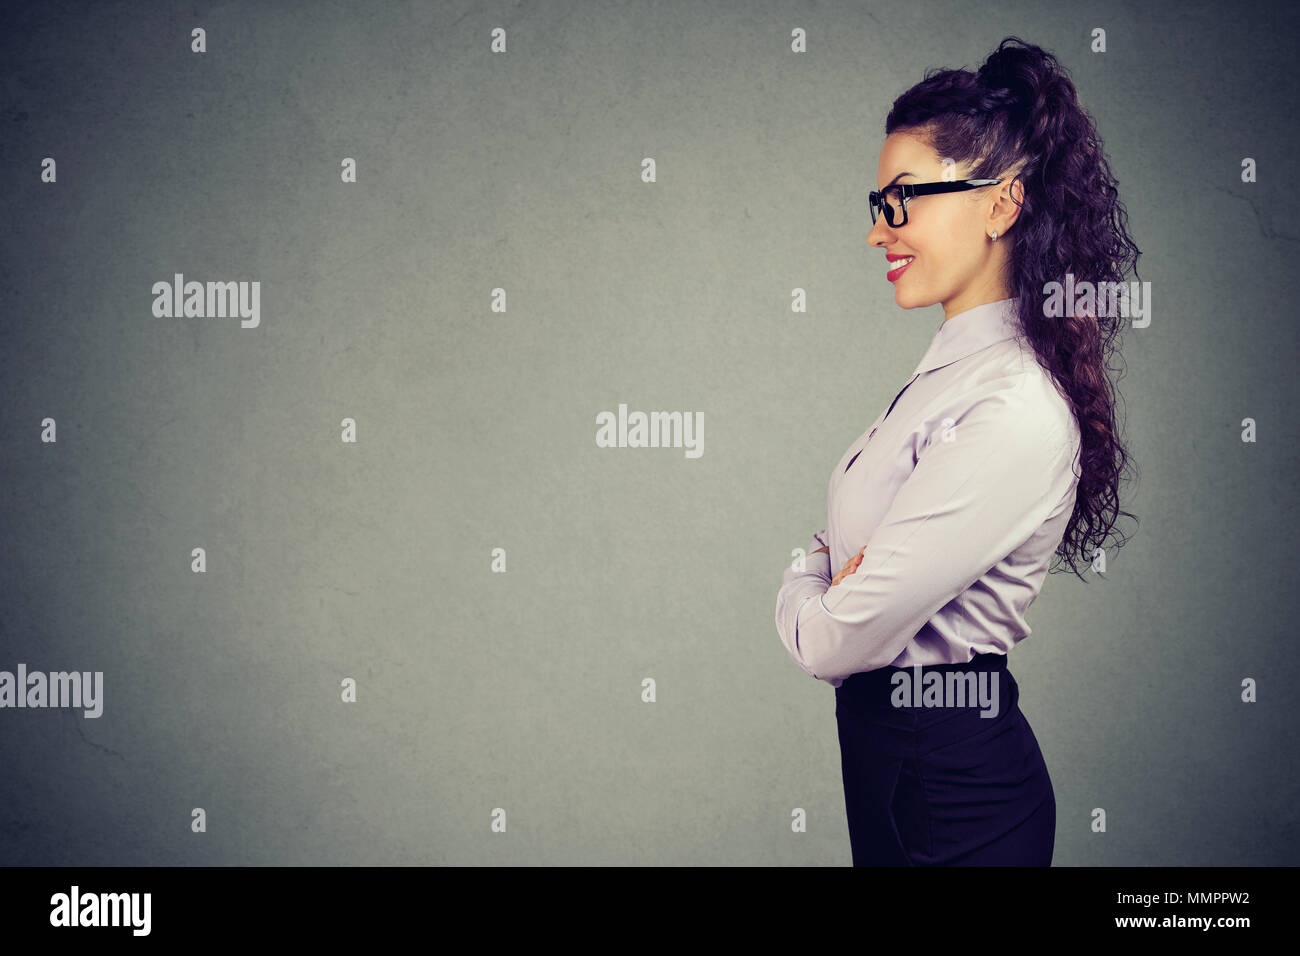 Portrait of a beautiful smiling young business woman Stock Photo